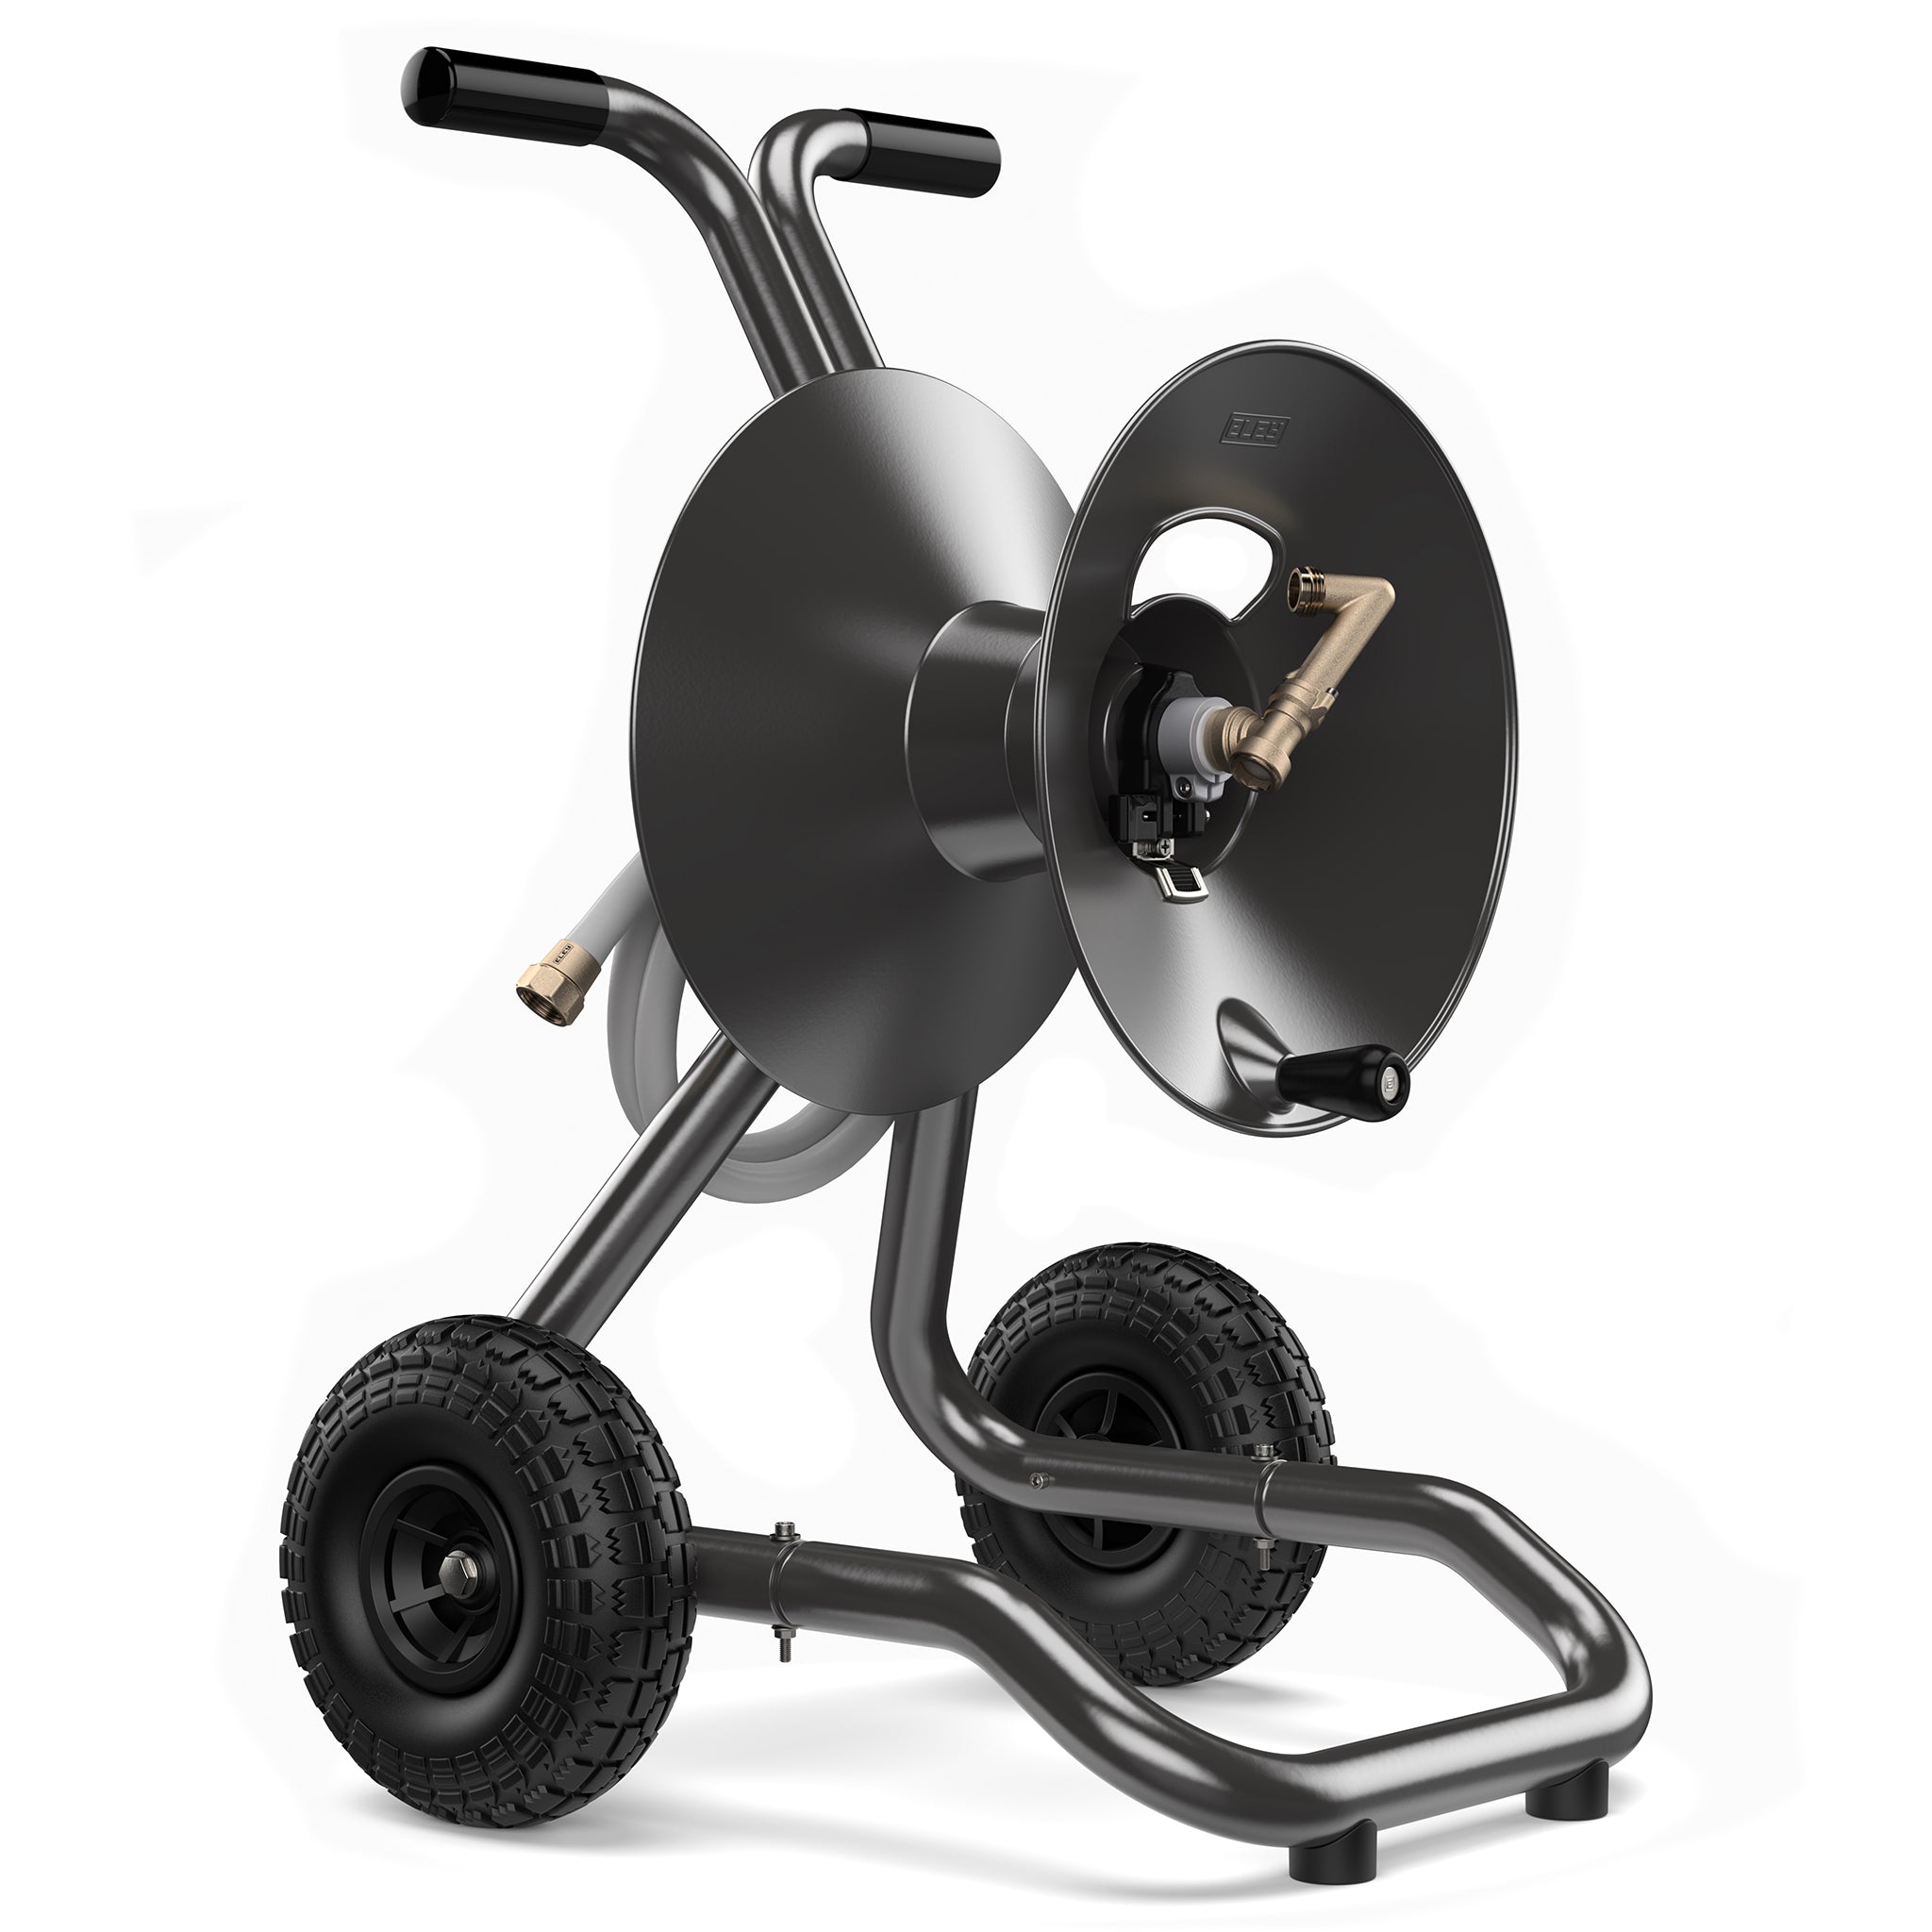 Wall Mounted Hose Reel-Stainless Steel  Hose reel, Garden hose reel, Stainless  steel hose